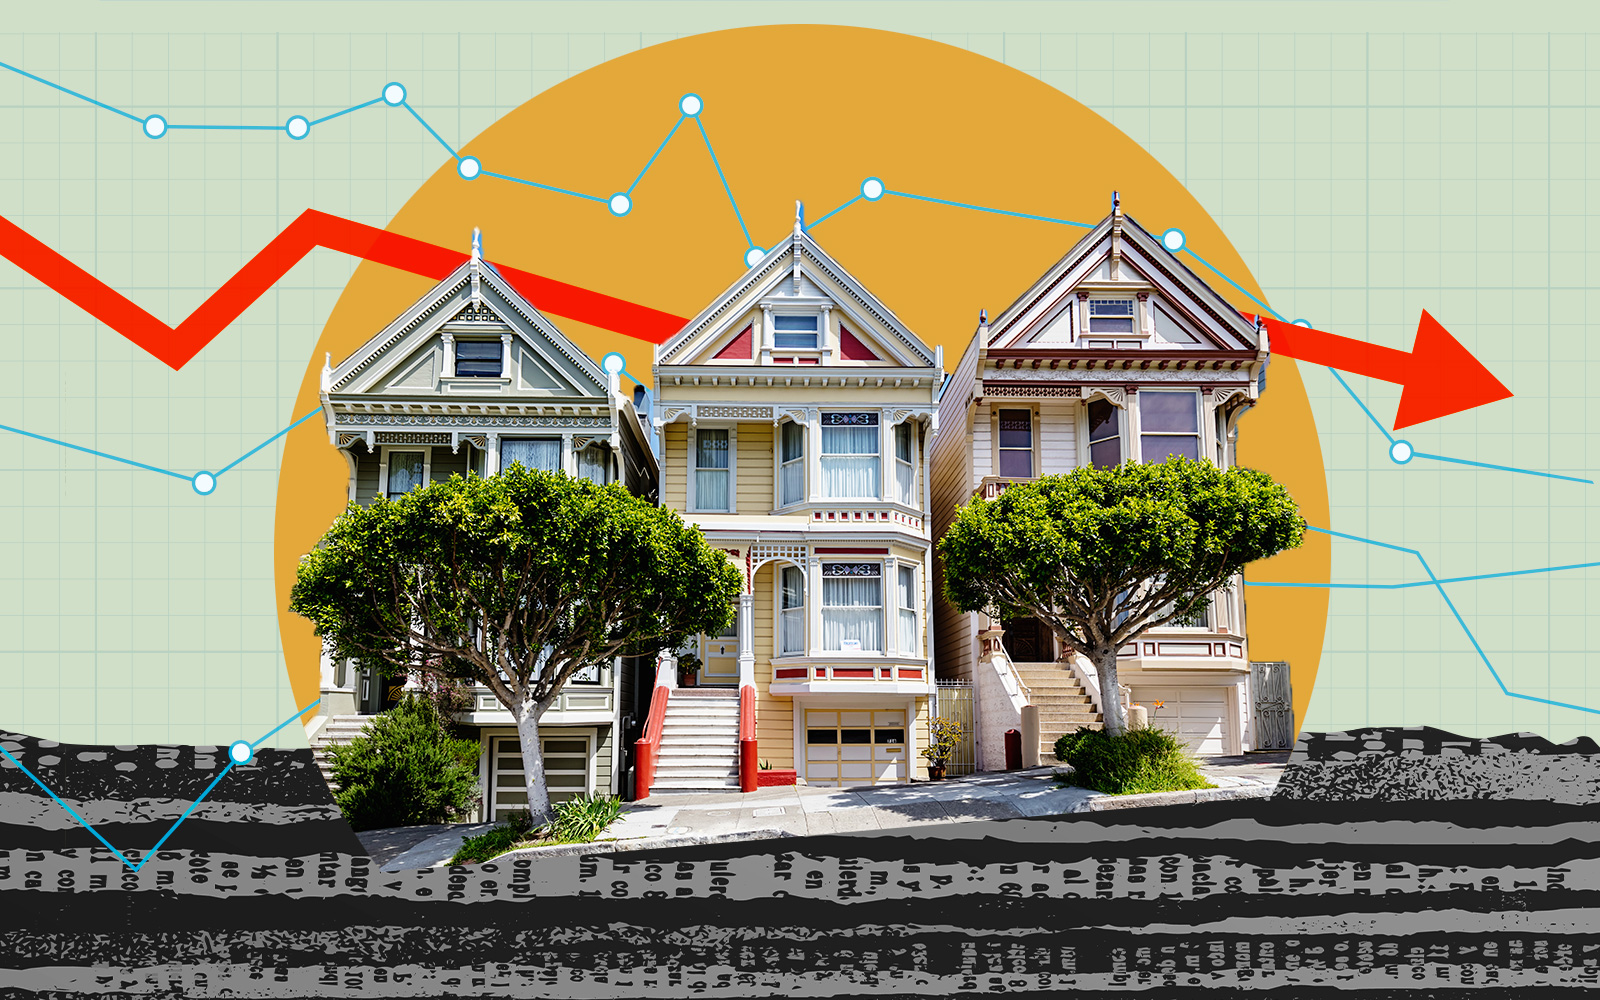 Home prices in Bay Area expected to fall 2.7% in the next year